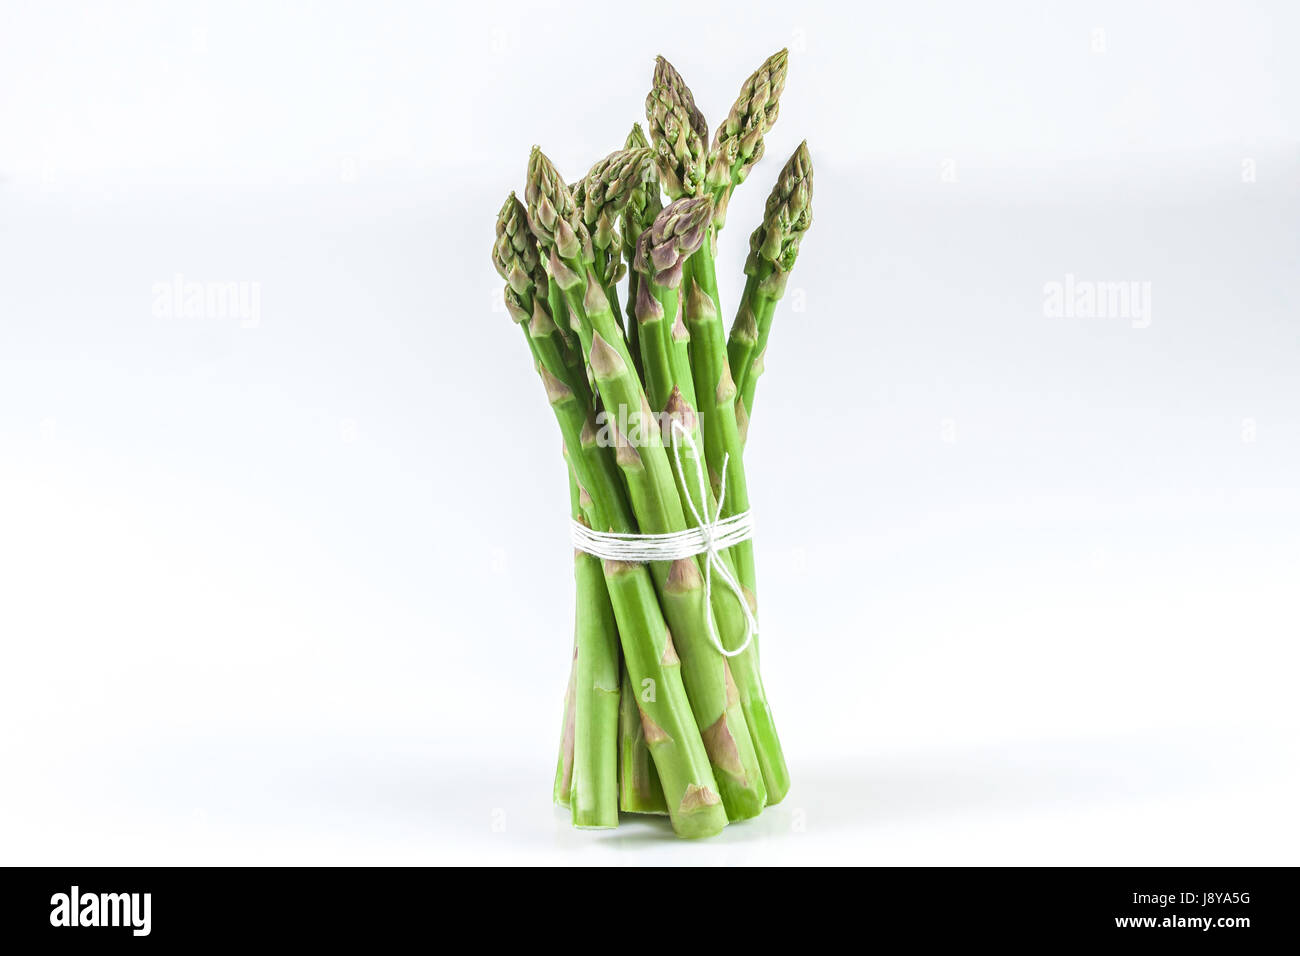 Sheaf of asparagus on a white background isolated Stock Photo